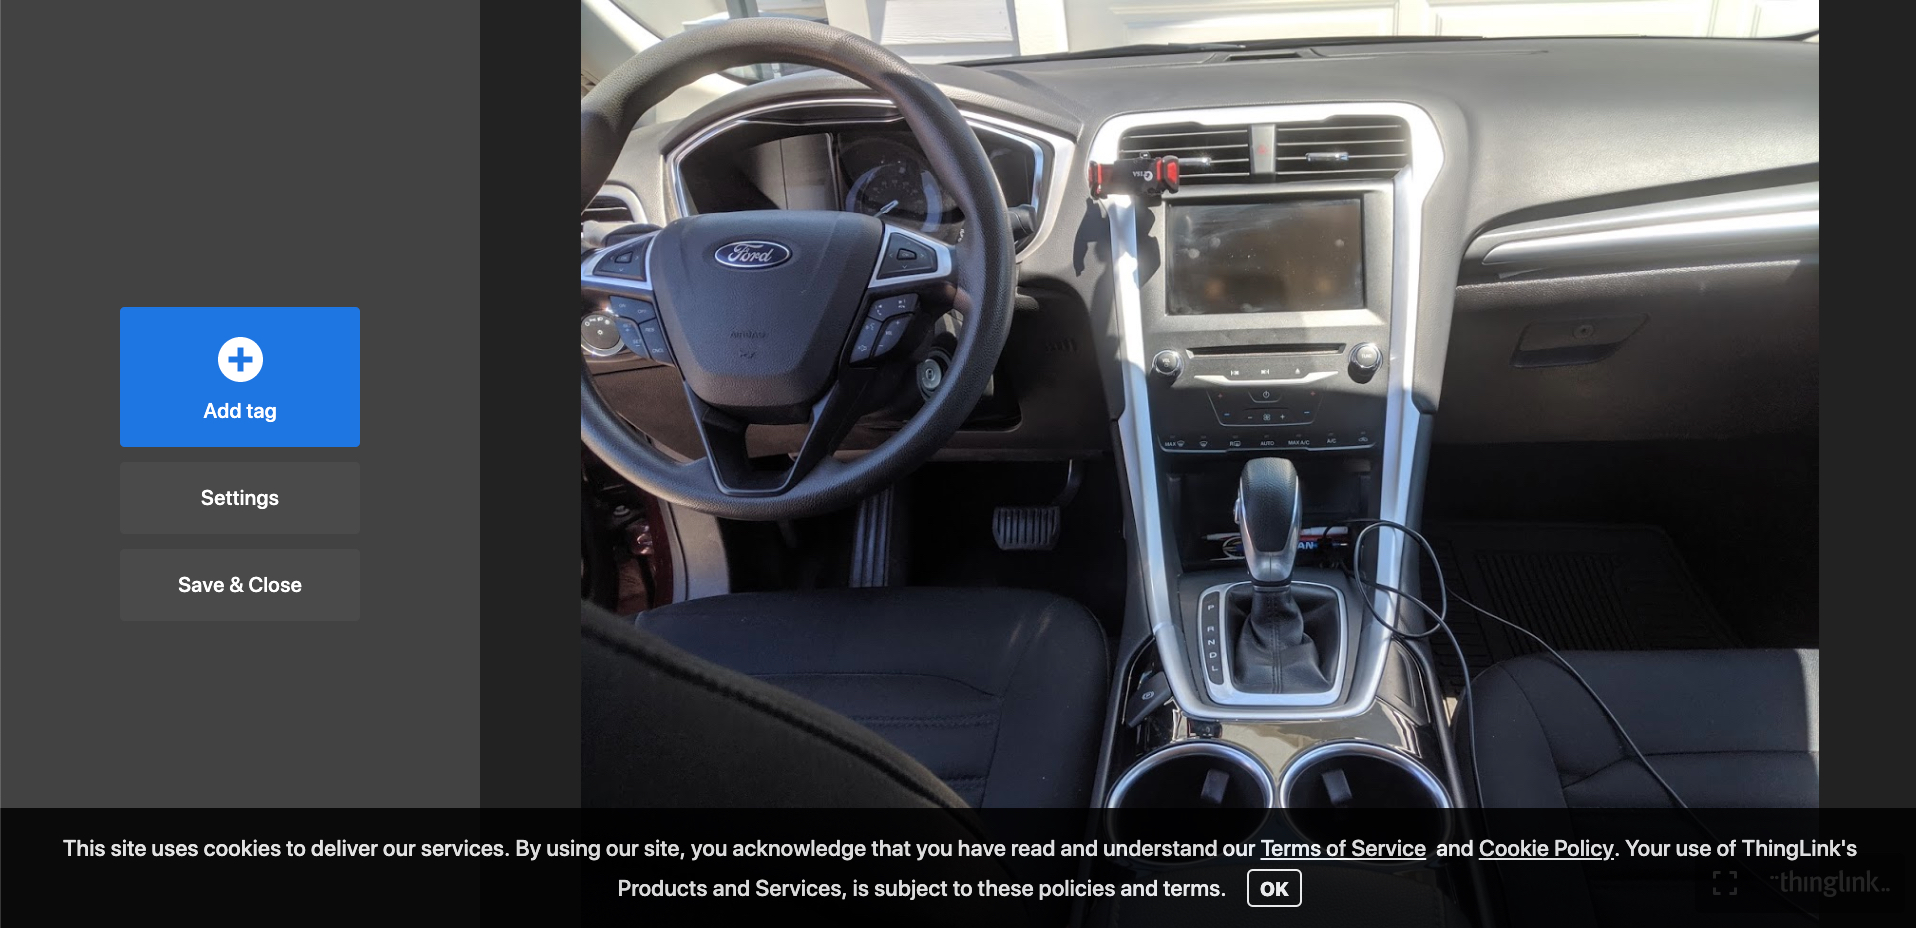 Figure 6. Image of car interior. Options on the left read Add Tag, Settings, and Save & Close